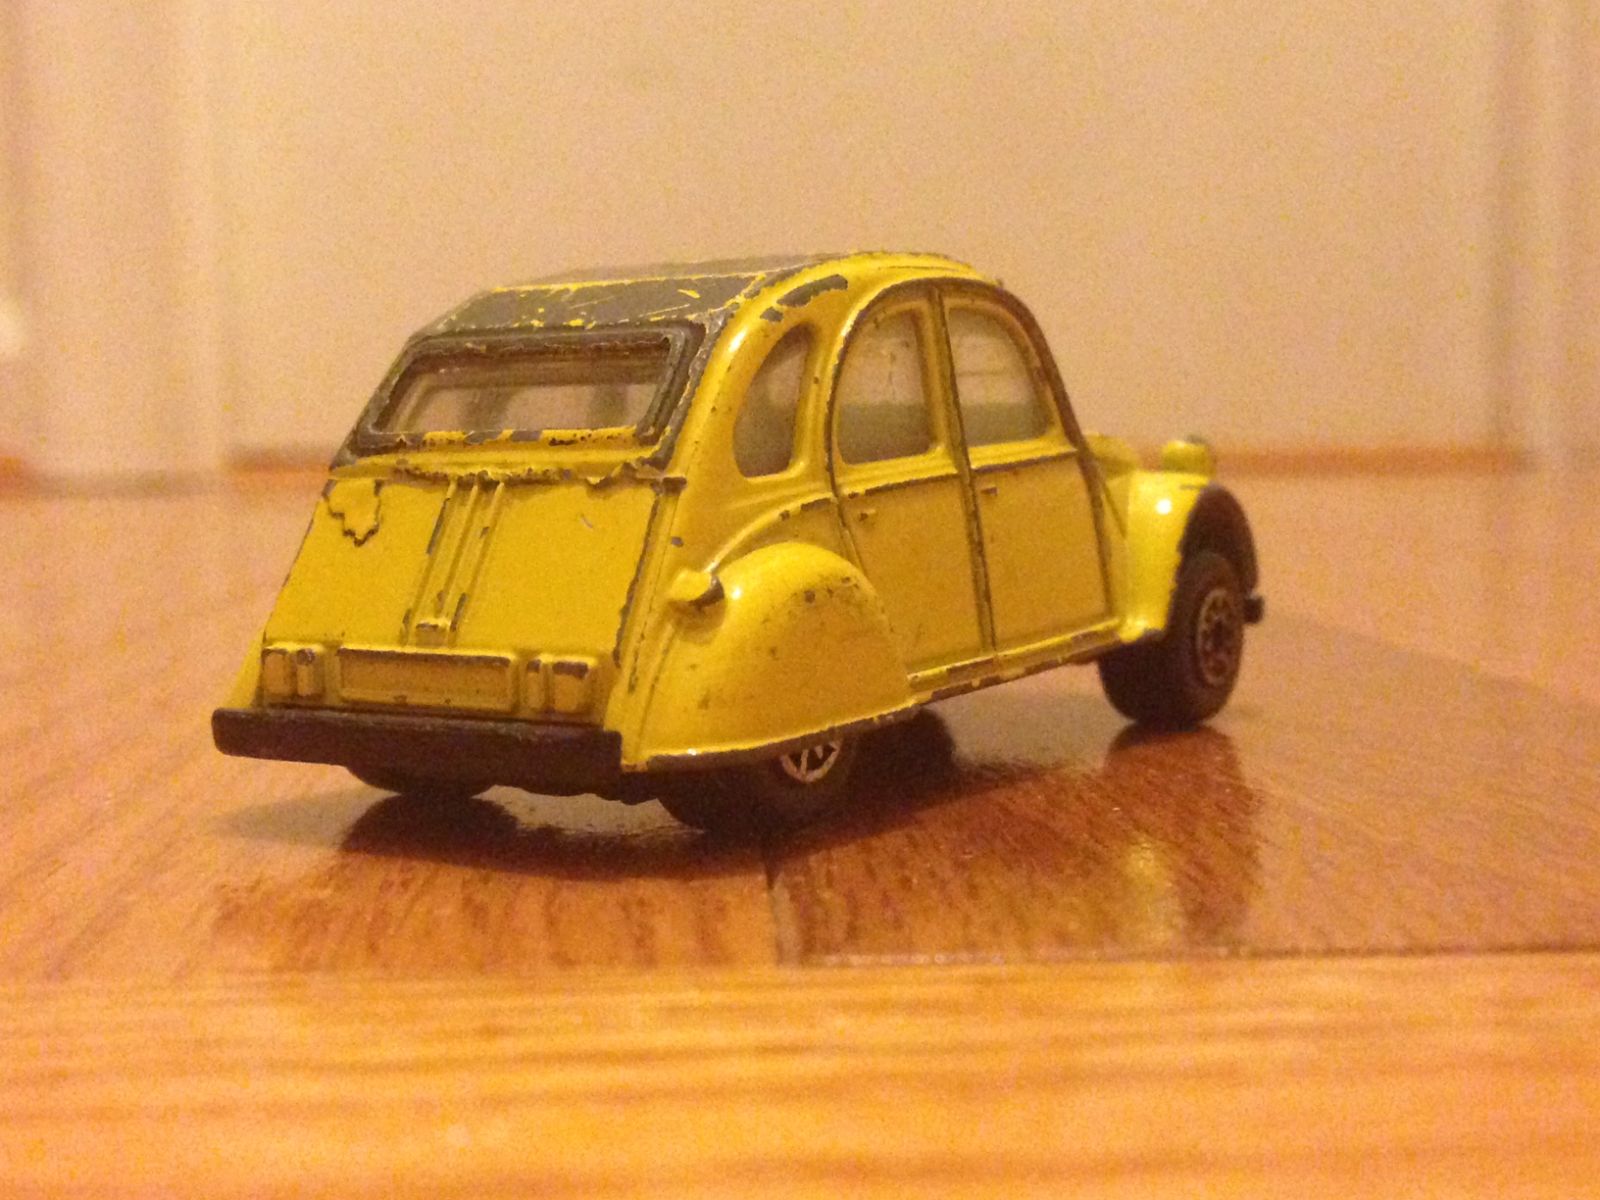 Illustration for article titled French Friday: 2CV, yo!